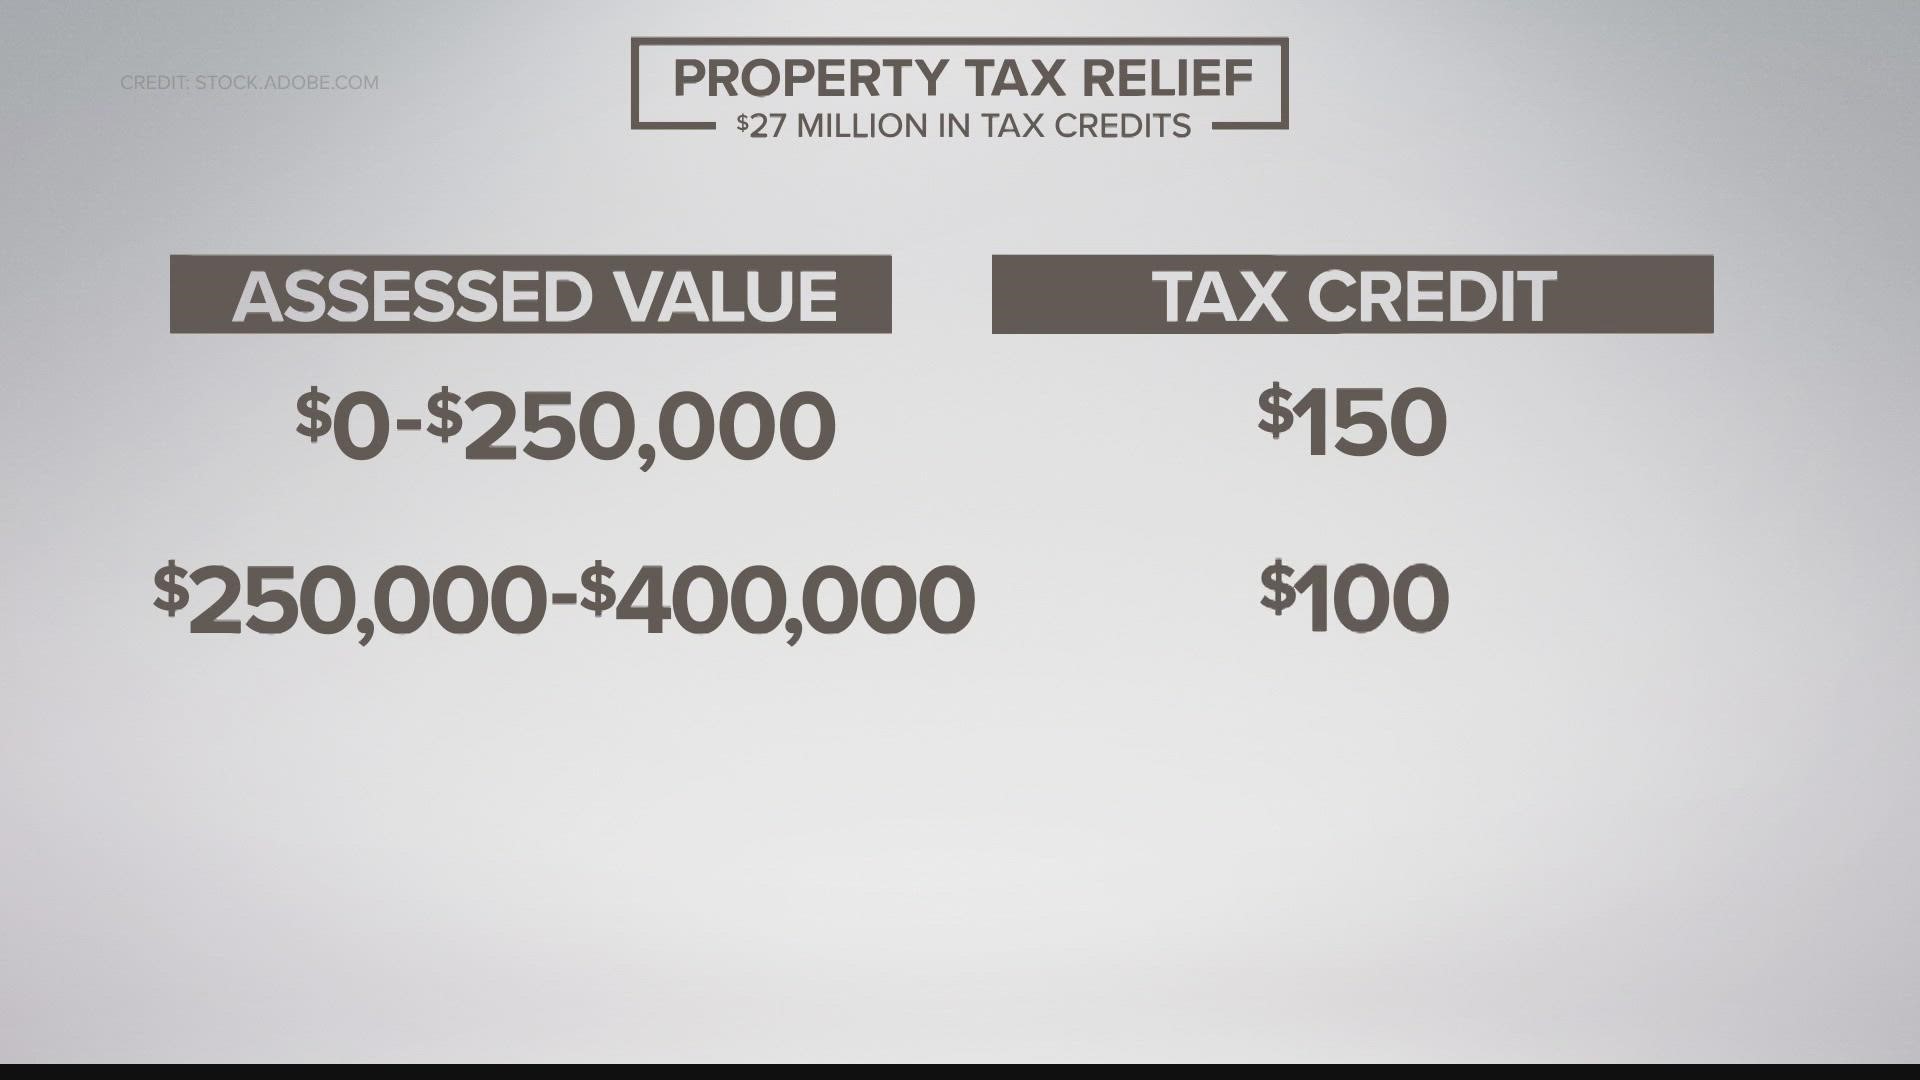 On Tuesday night, the City-County committee voted to send the property tax relief proposal to the full Council.